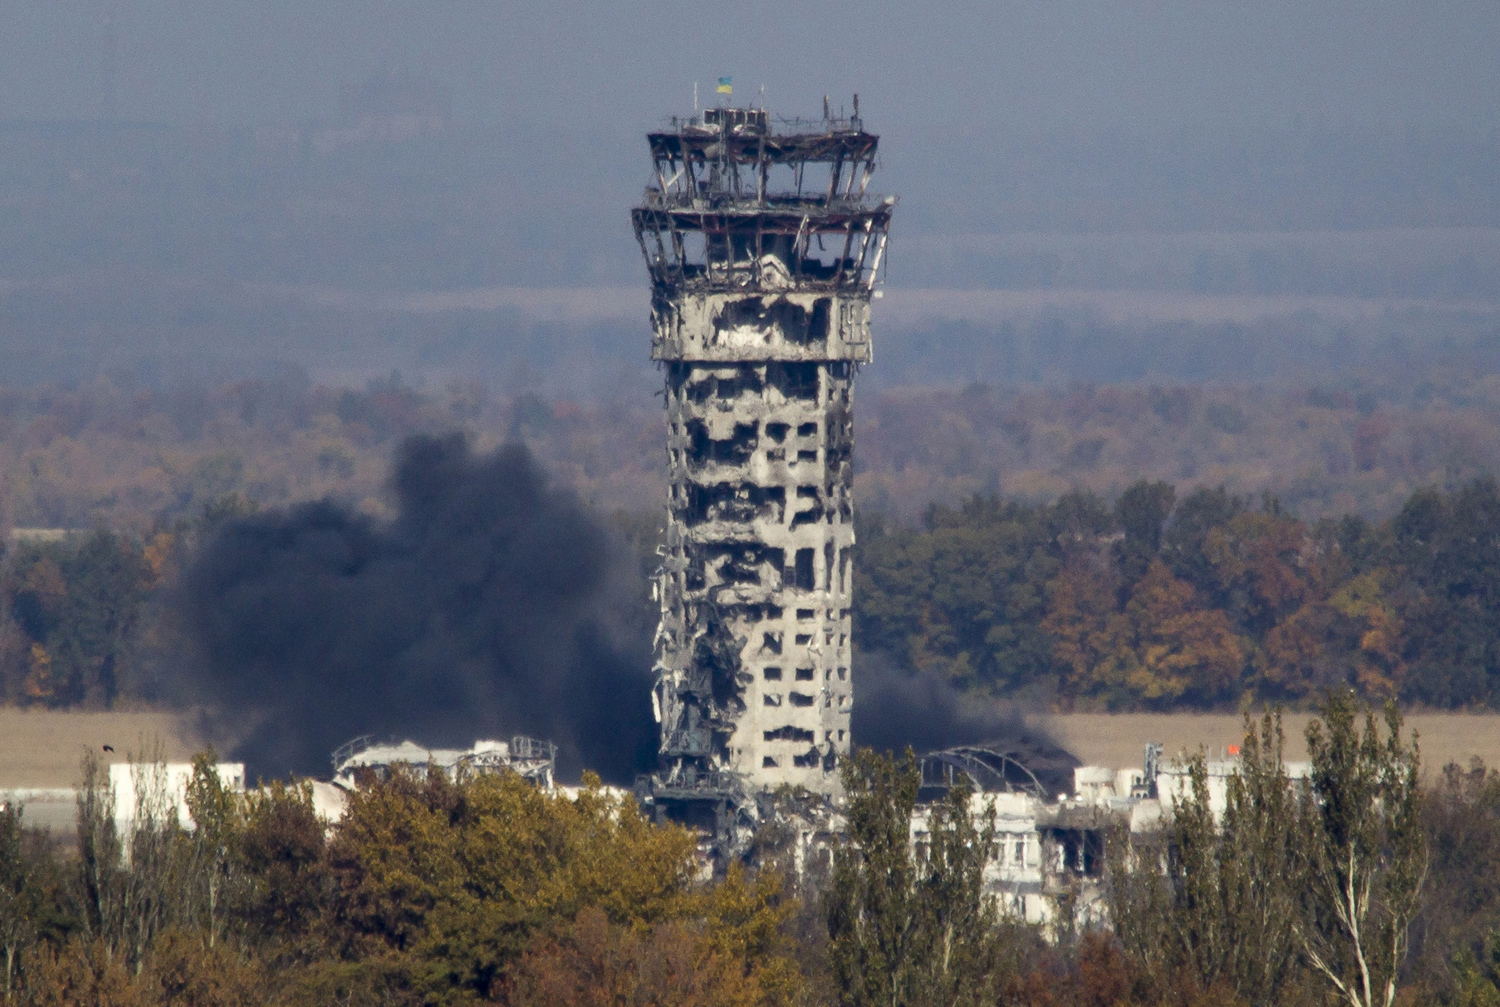 A Ukrainian national flag flies at top of a badly damaged traffic control tower as smoke rises after shelling at the airport on October 12, 2014.